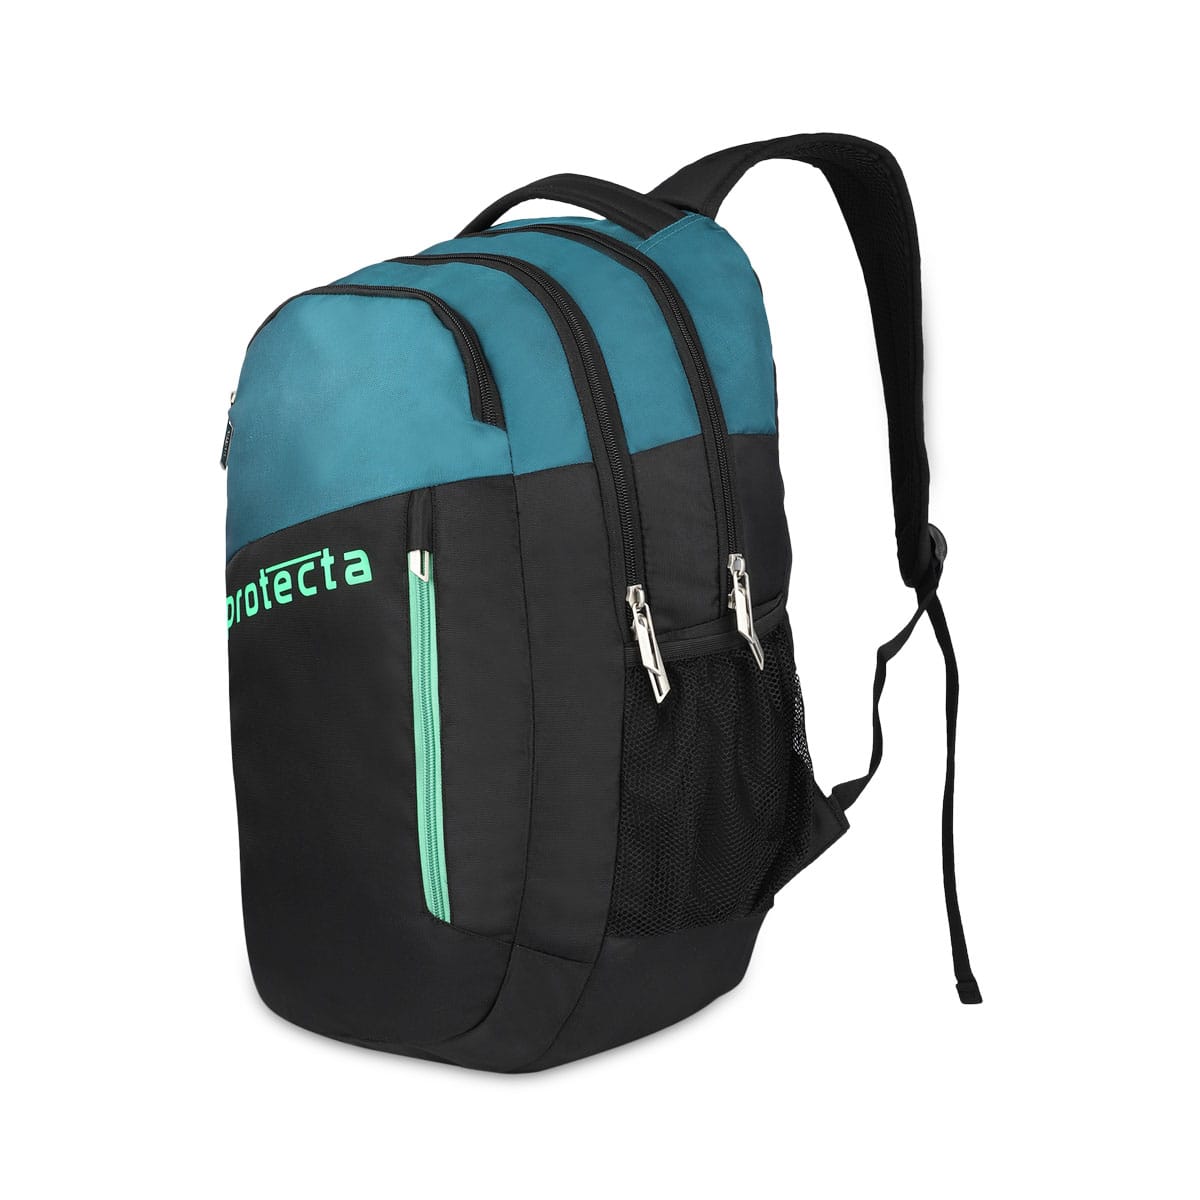 Black-Astral | Protecta Twister Laptop Backpack-Main